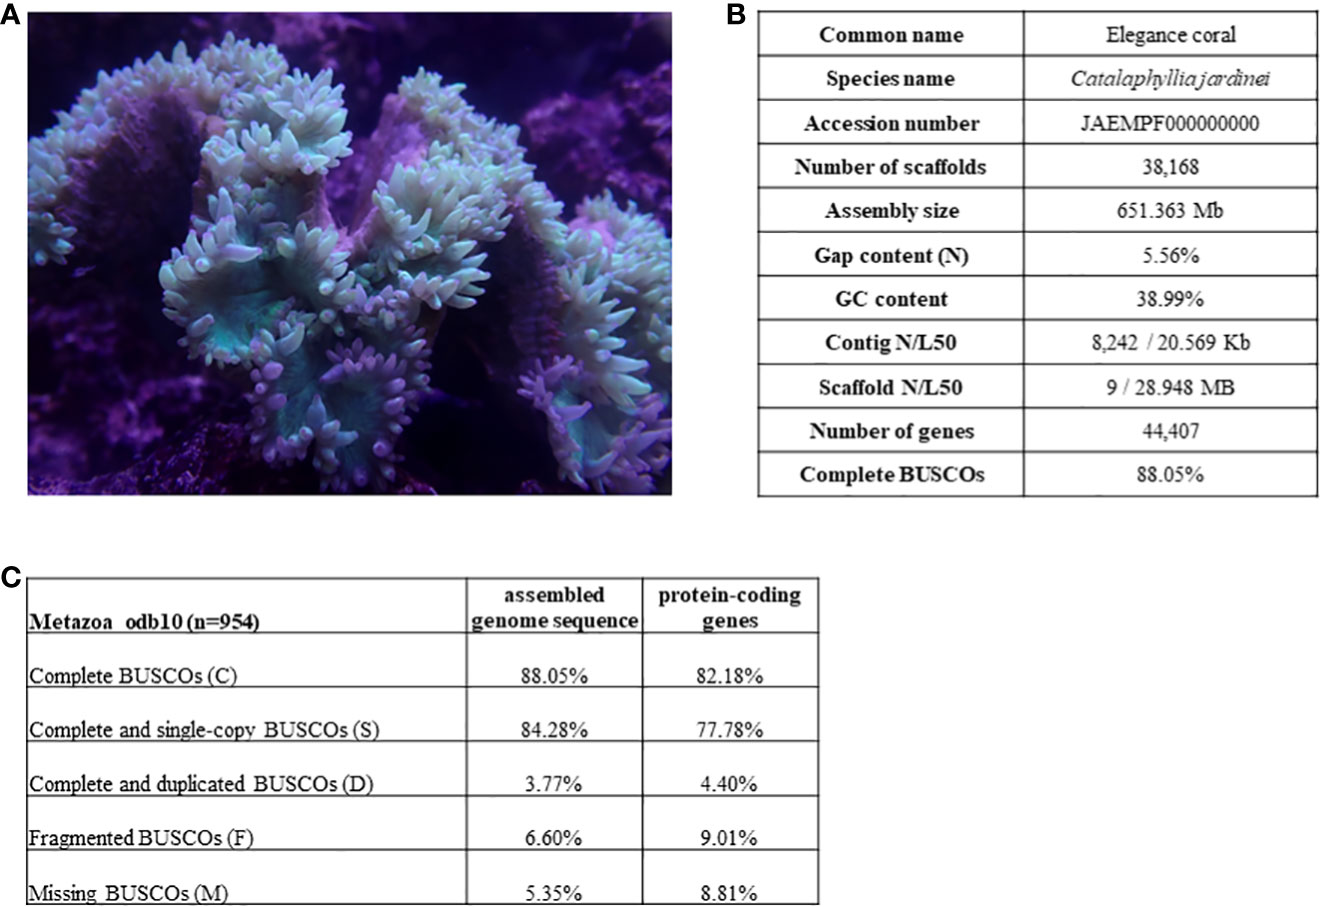 Frontiers | Genome of elegance coral Catalaphyllia jardinei